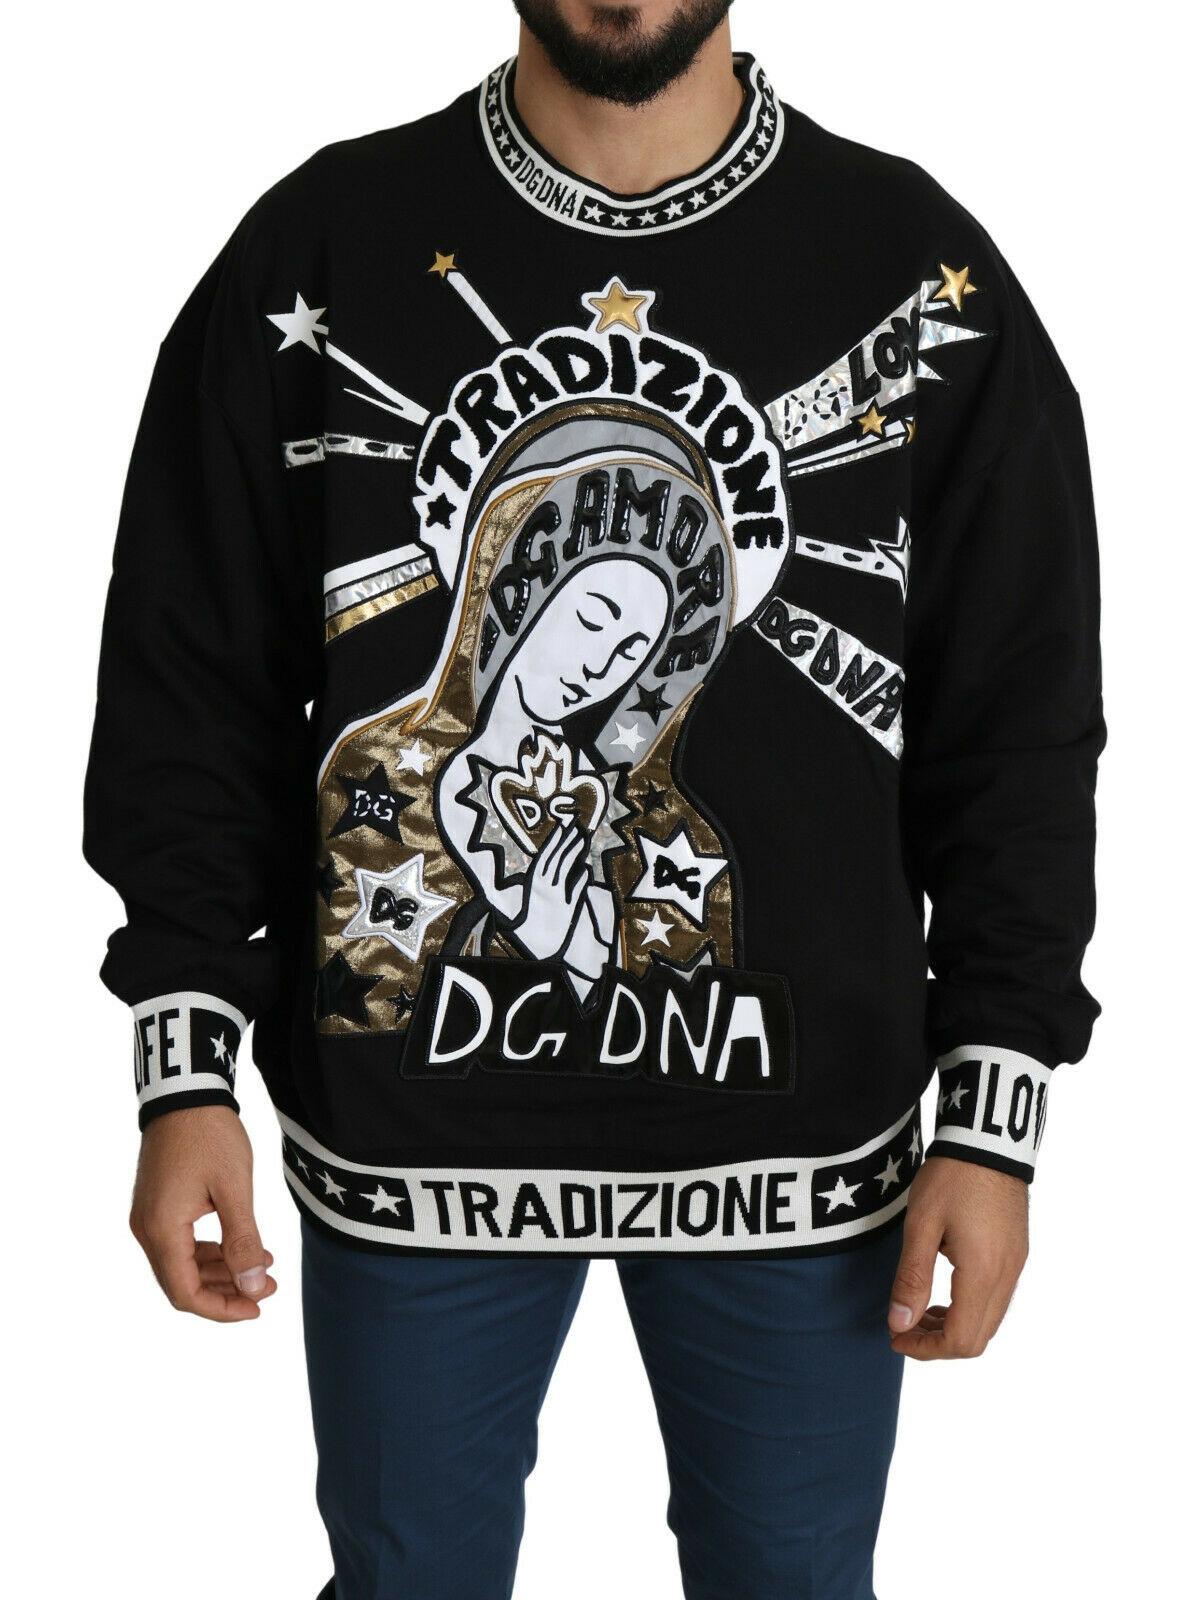  Absolutely stunning, 100% Authentic, brand new with tags Dolce & Gabbana sweatshirt fleece, embroidered detailing, logo, multicolour pattern, long sleeves, knitted cuffs, fully lined, iridescent effect.




Model: Pullover sweater
Color: Black
Logo